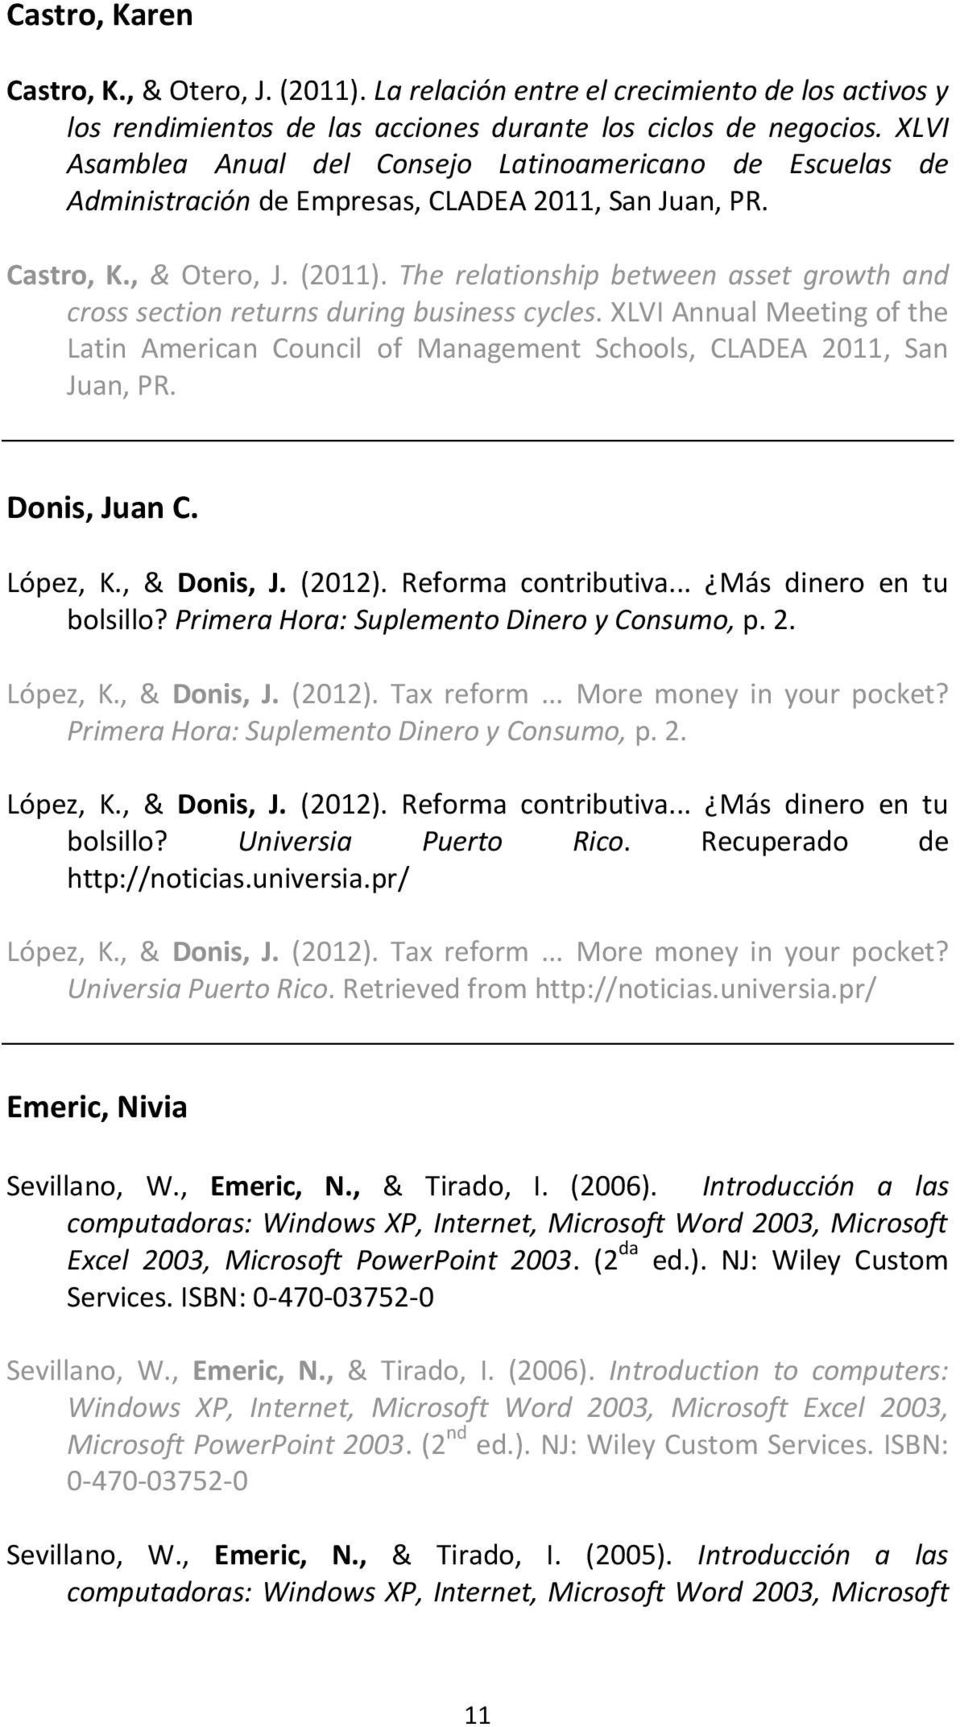 The relationship between asset growth and cross section returns during business cycles. XLVI Annual Meeting of the Latin American Council of Management Schools, CLADEA 2011, San Juan, PR.